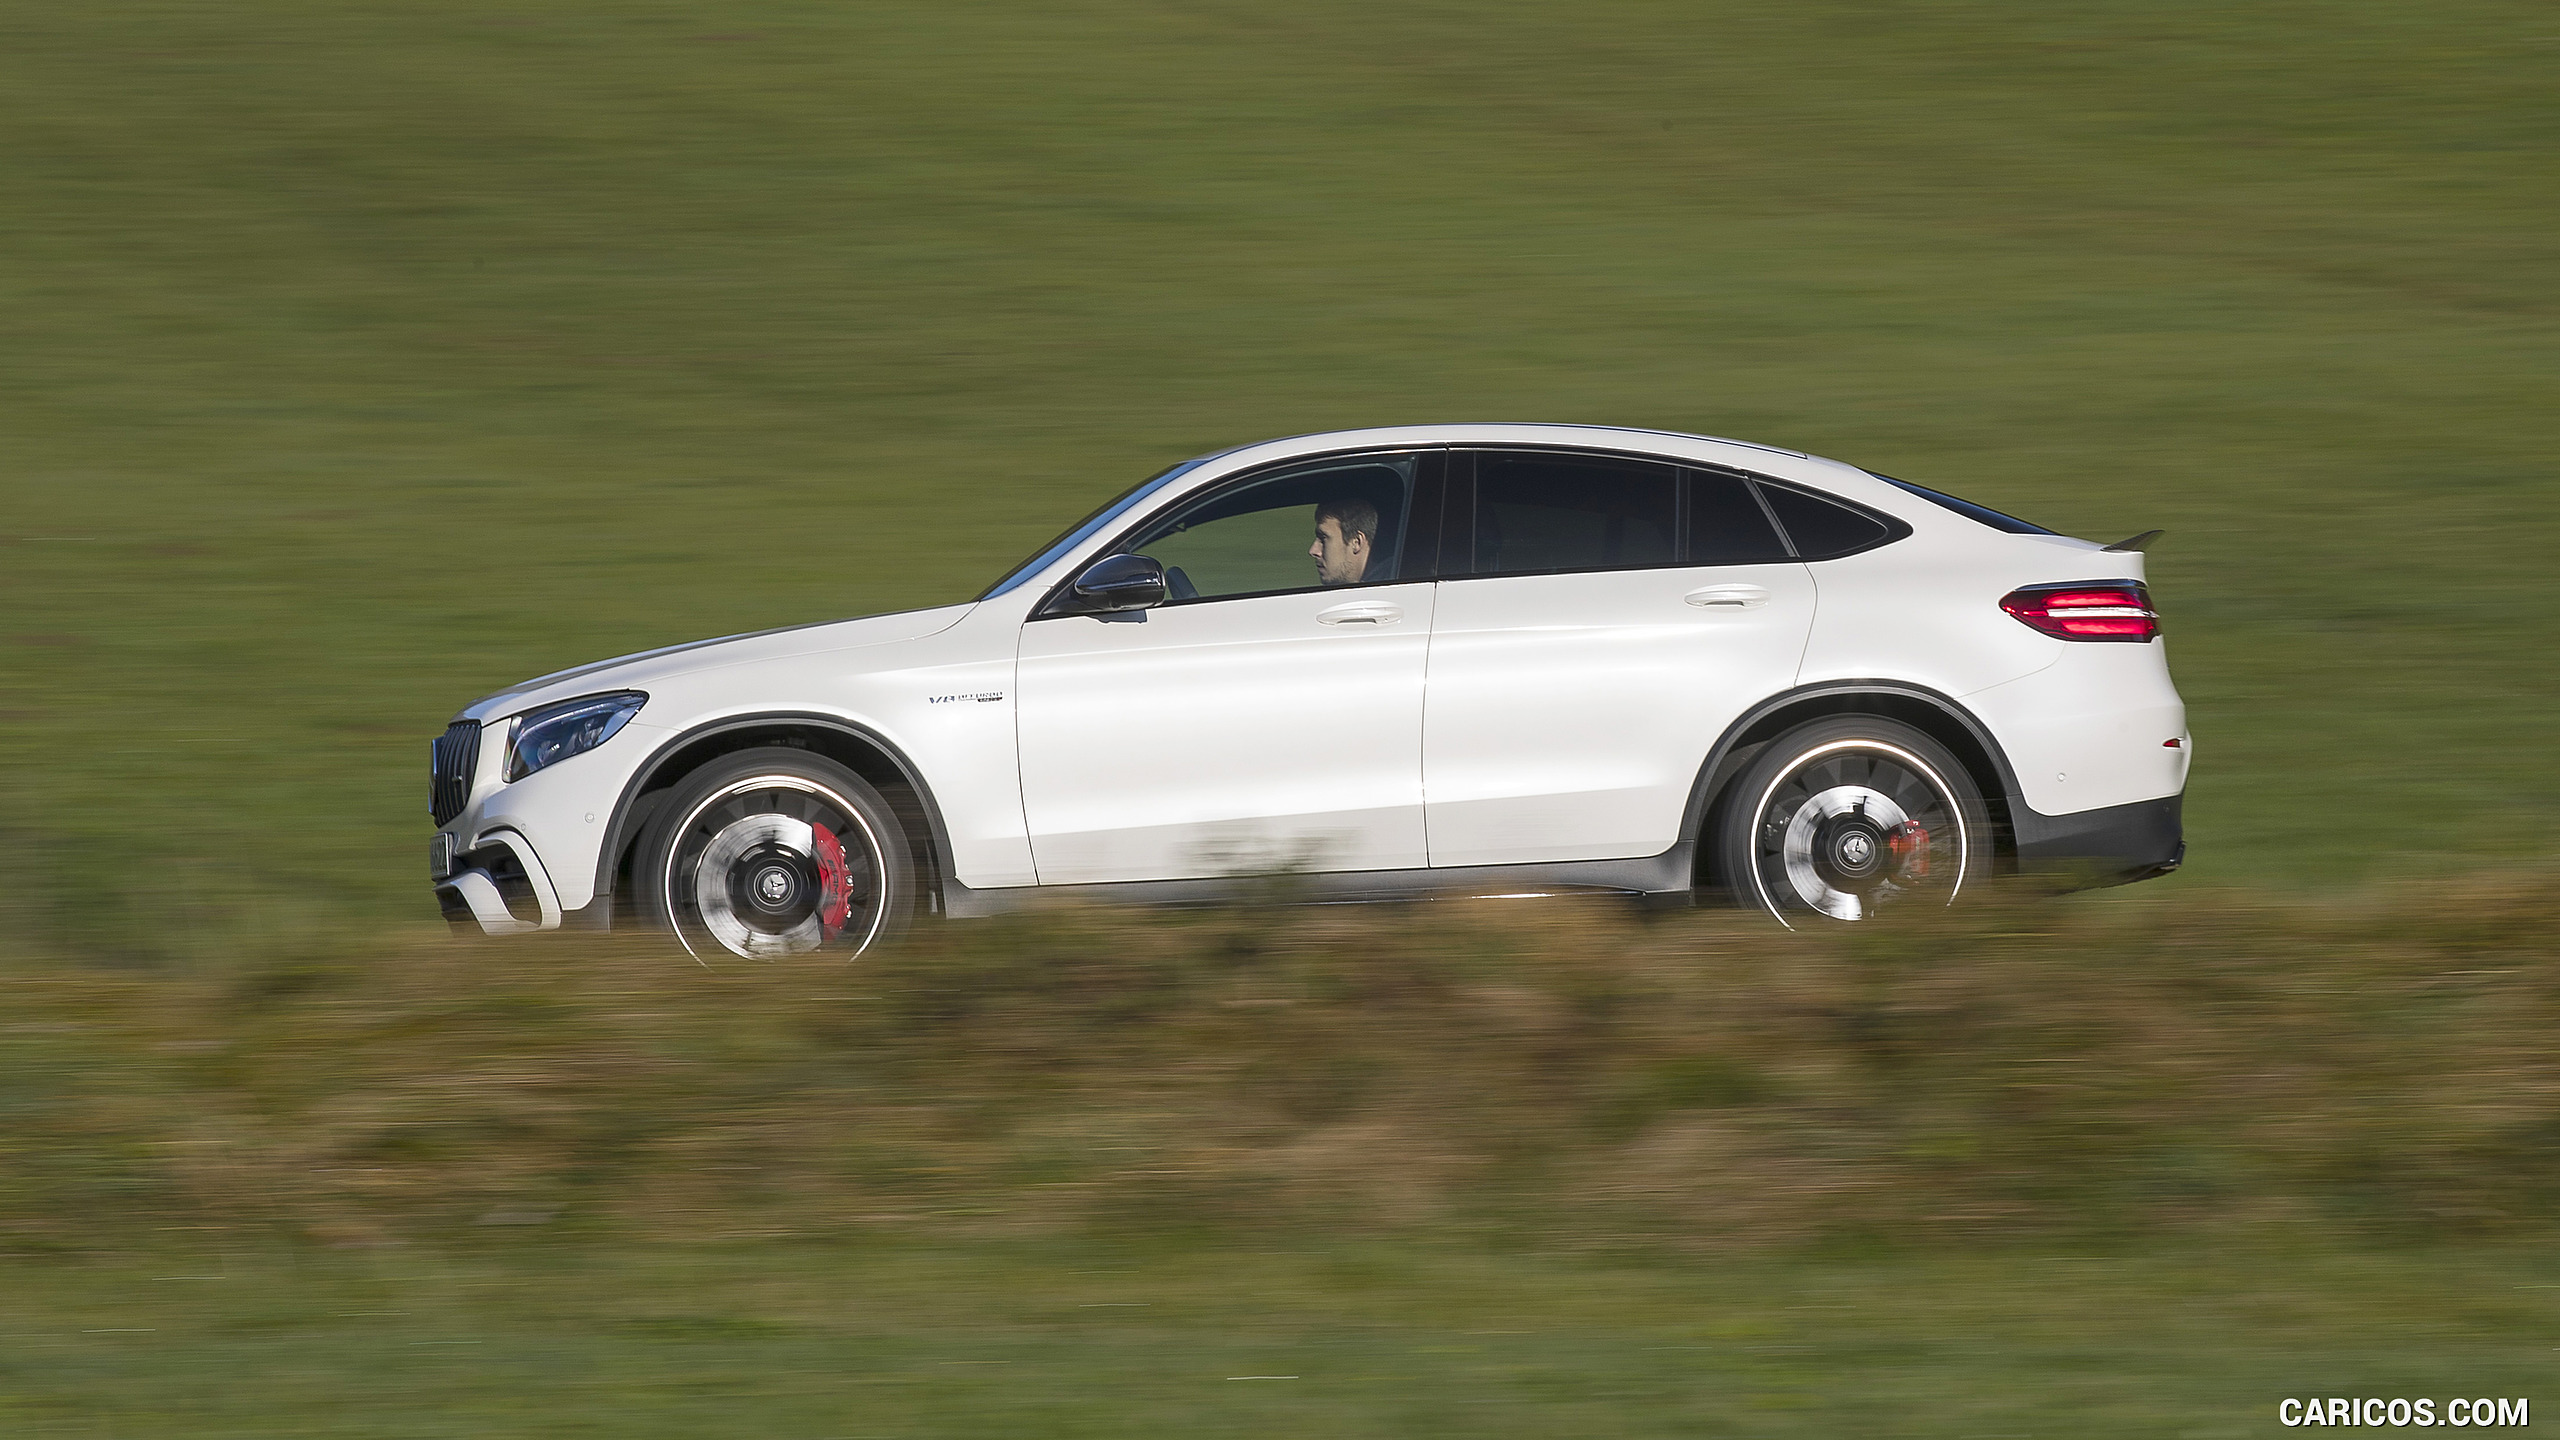 2018 Mercedes-AMG GLC 63 S Coupe - Side, #38 of 75